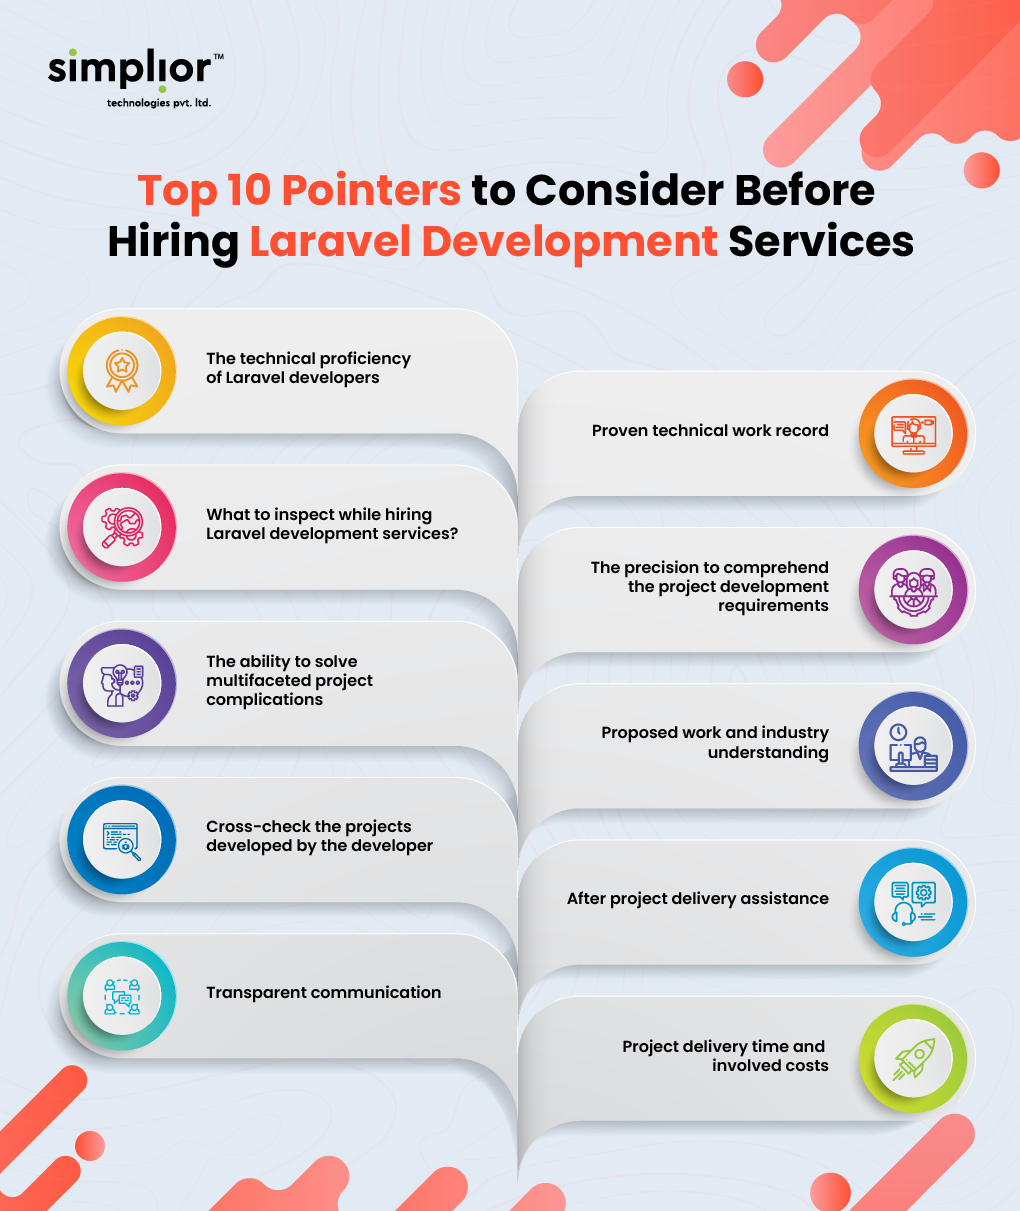 Top 10 Pointers to Consider Before Hiring Laravel Development Services - Simplior